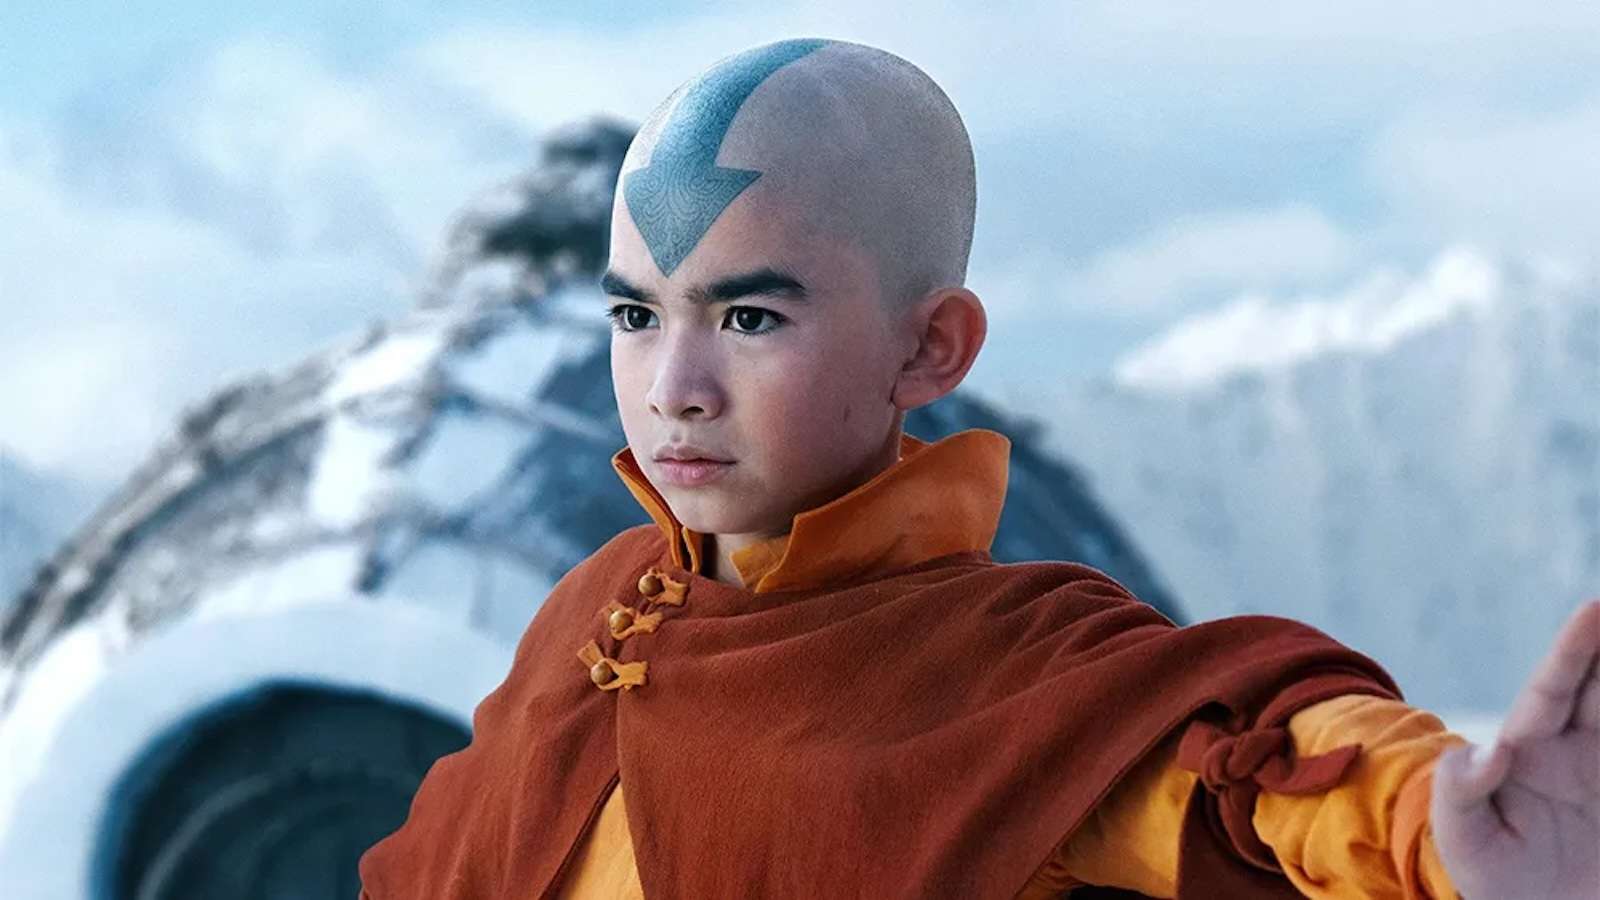 Aang in Avatar: The Last Airbender on Netflix